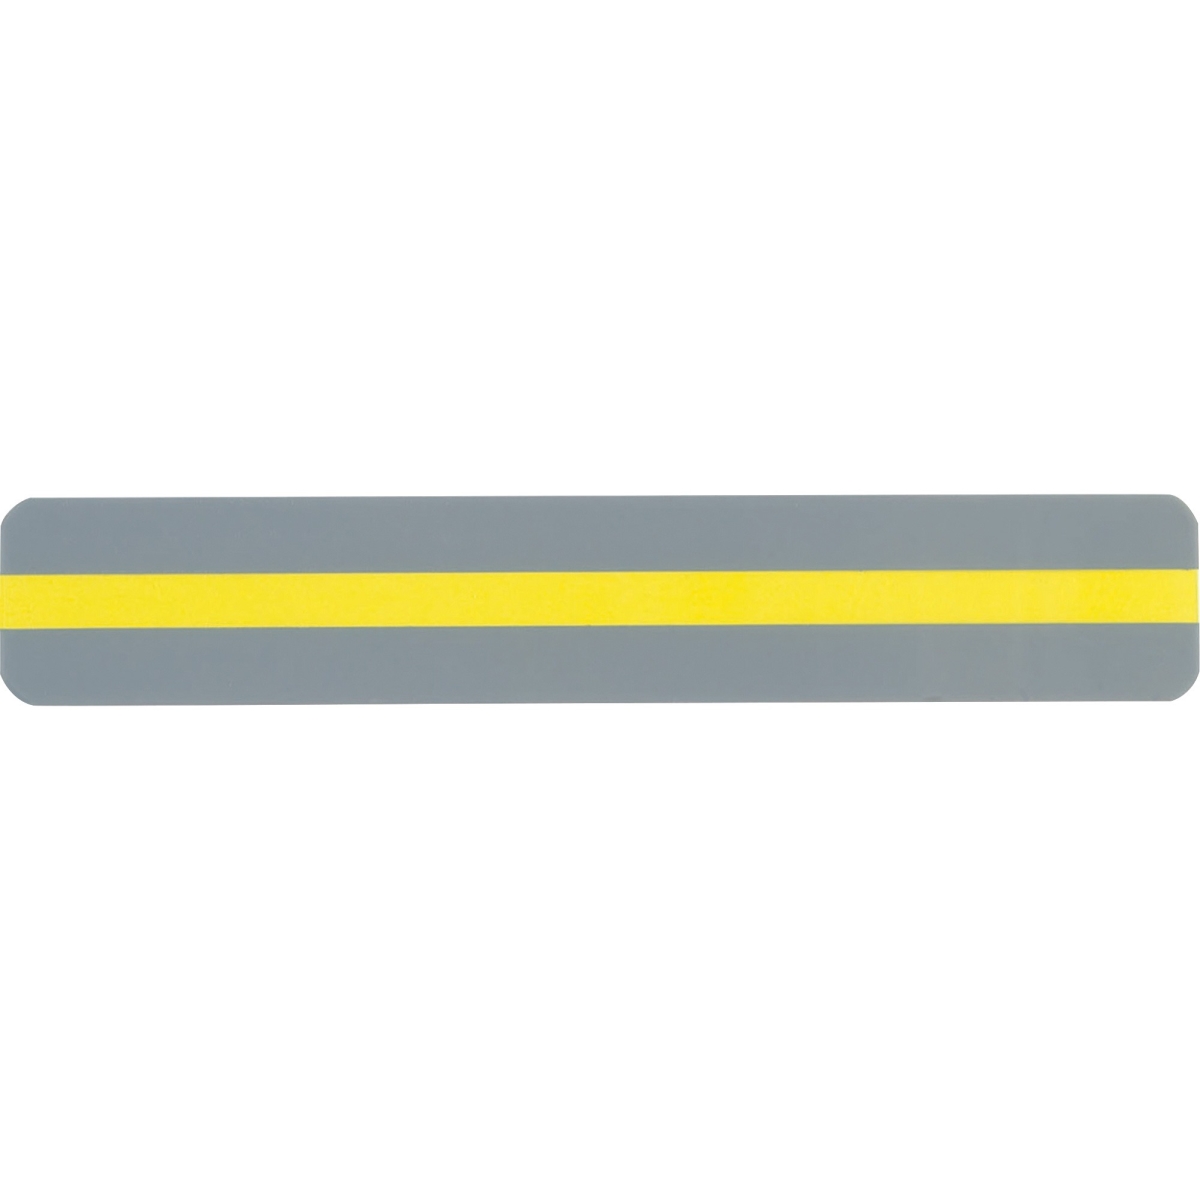 Picture of Ashley ASH10850 Reading Guide Strips, 12 Count - Yellow